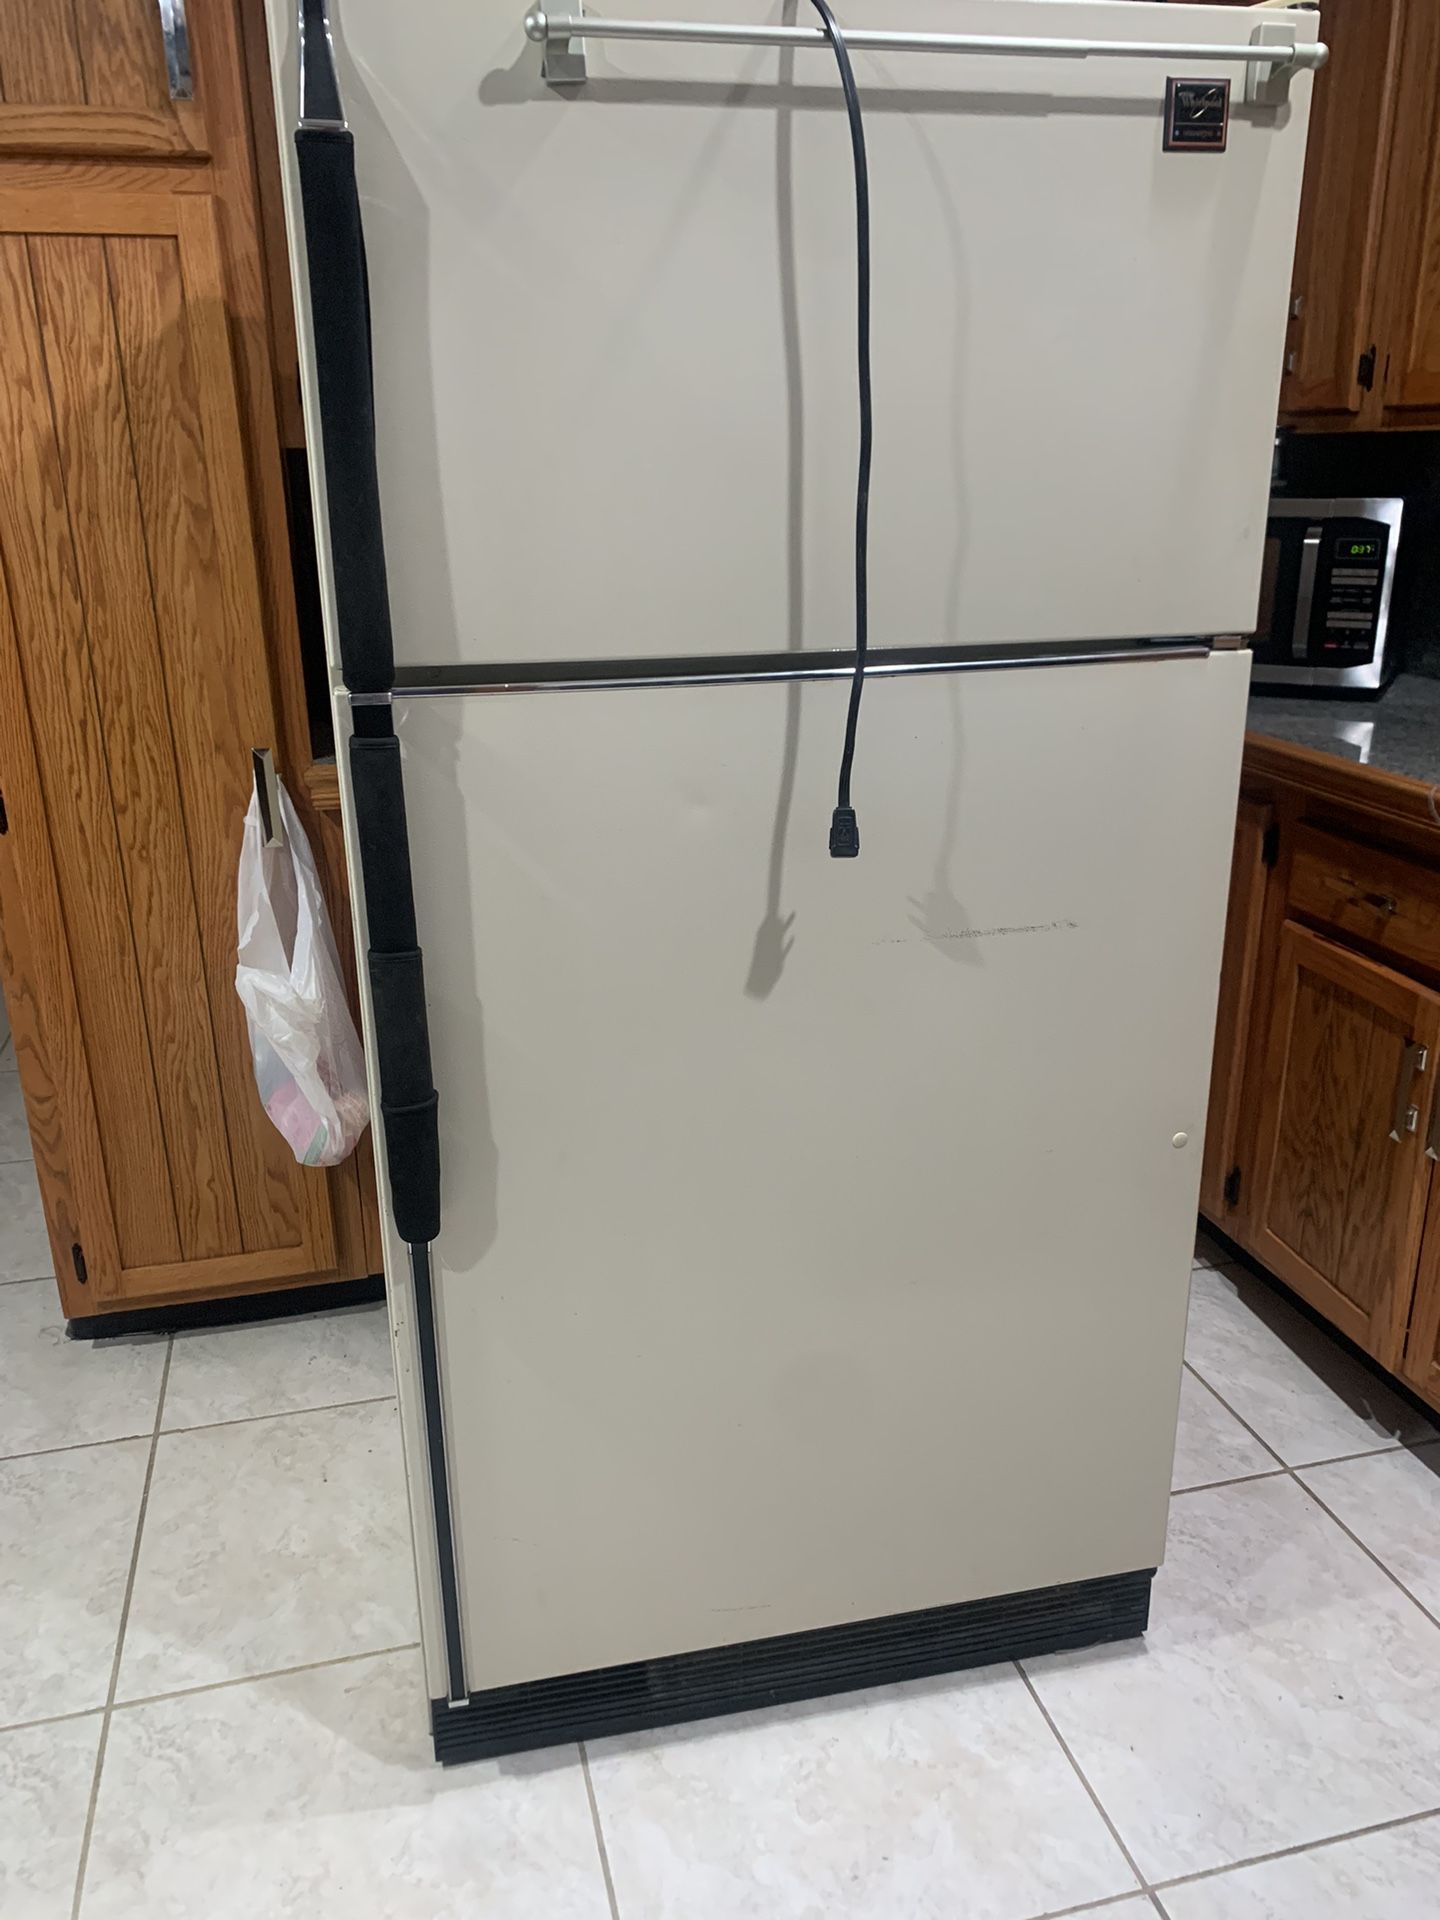 Whirlpool Refrigerator For Sale Must Go Soon Works Fine Just Older Look!